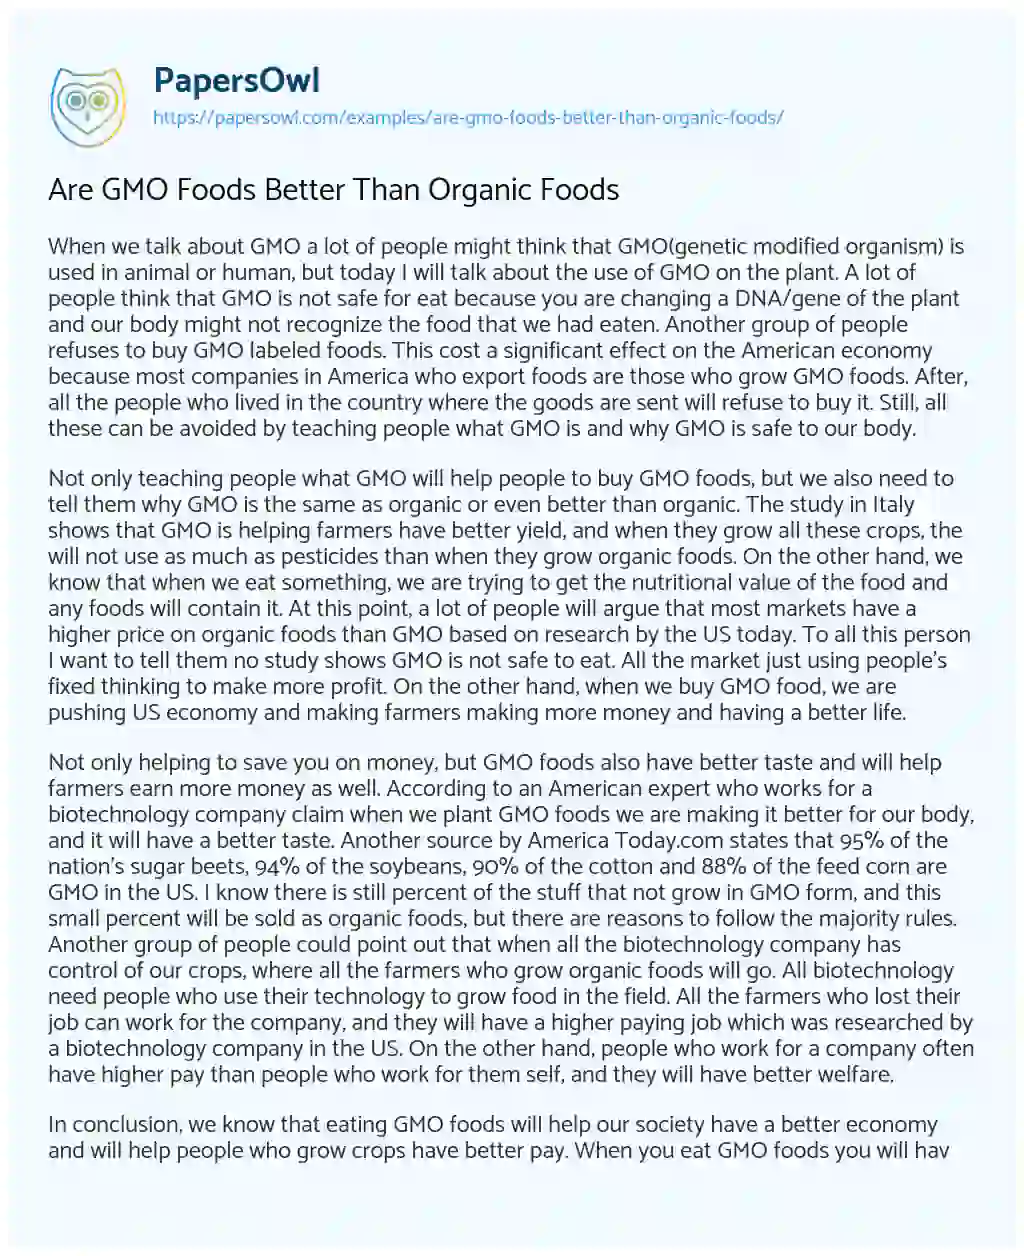 Are GMO Foods Better than Organic Foods essay